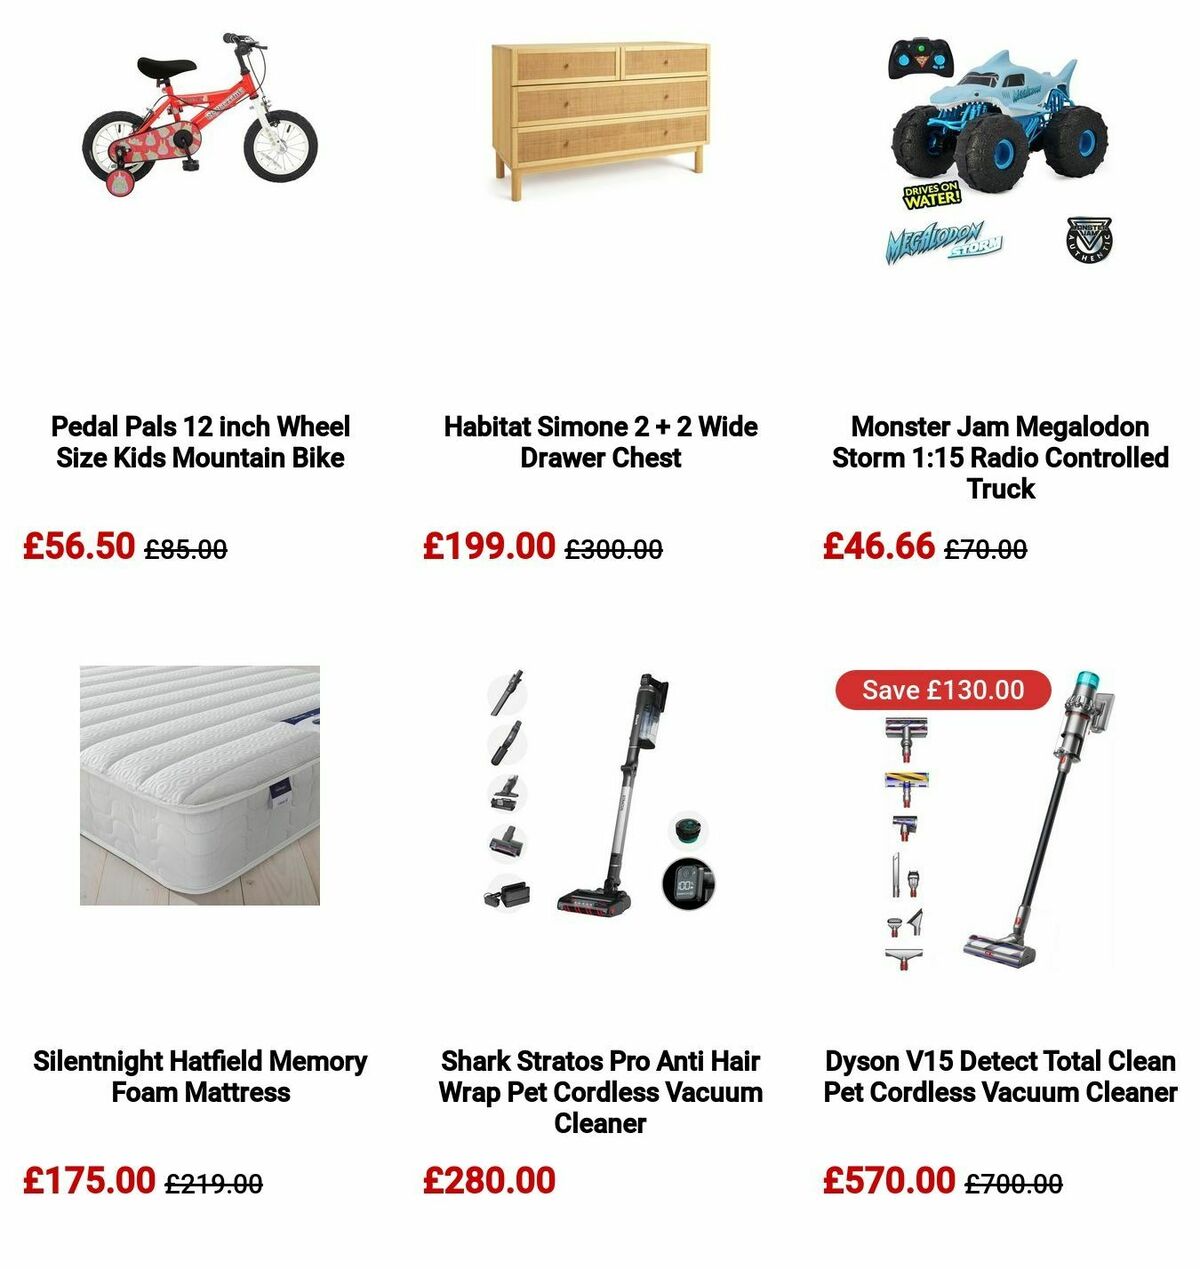 Argos Offers from 26 March